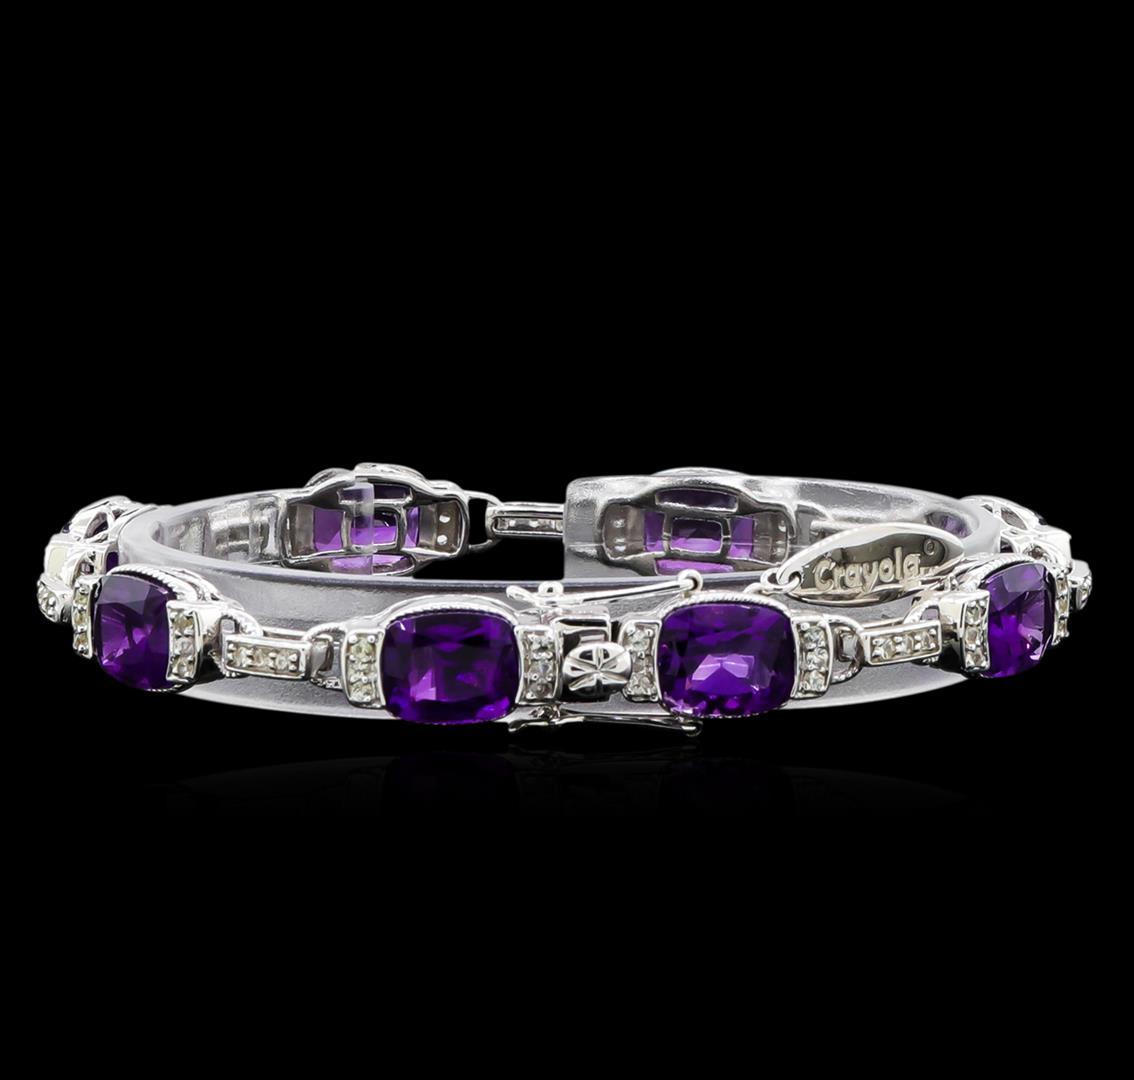 Crayola 20.00 ctw Amethyst and White Sapphire Bracelet - .925 Silver